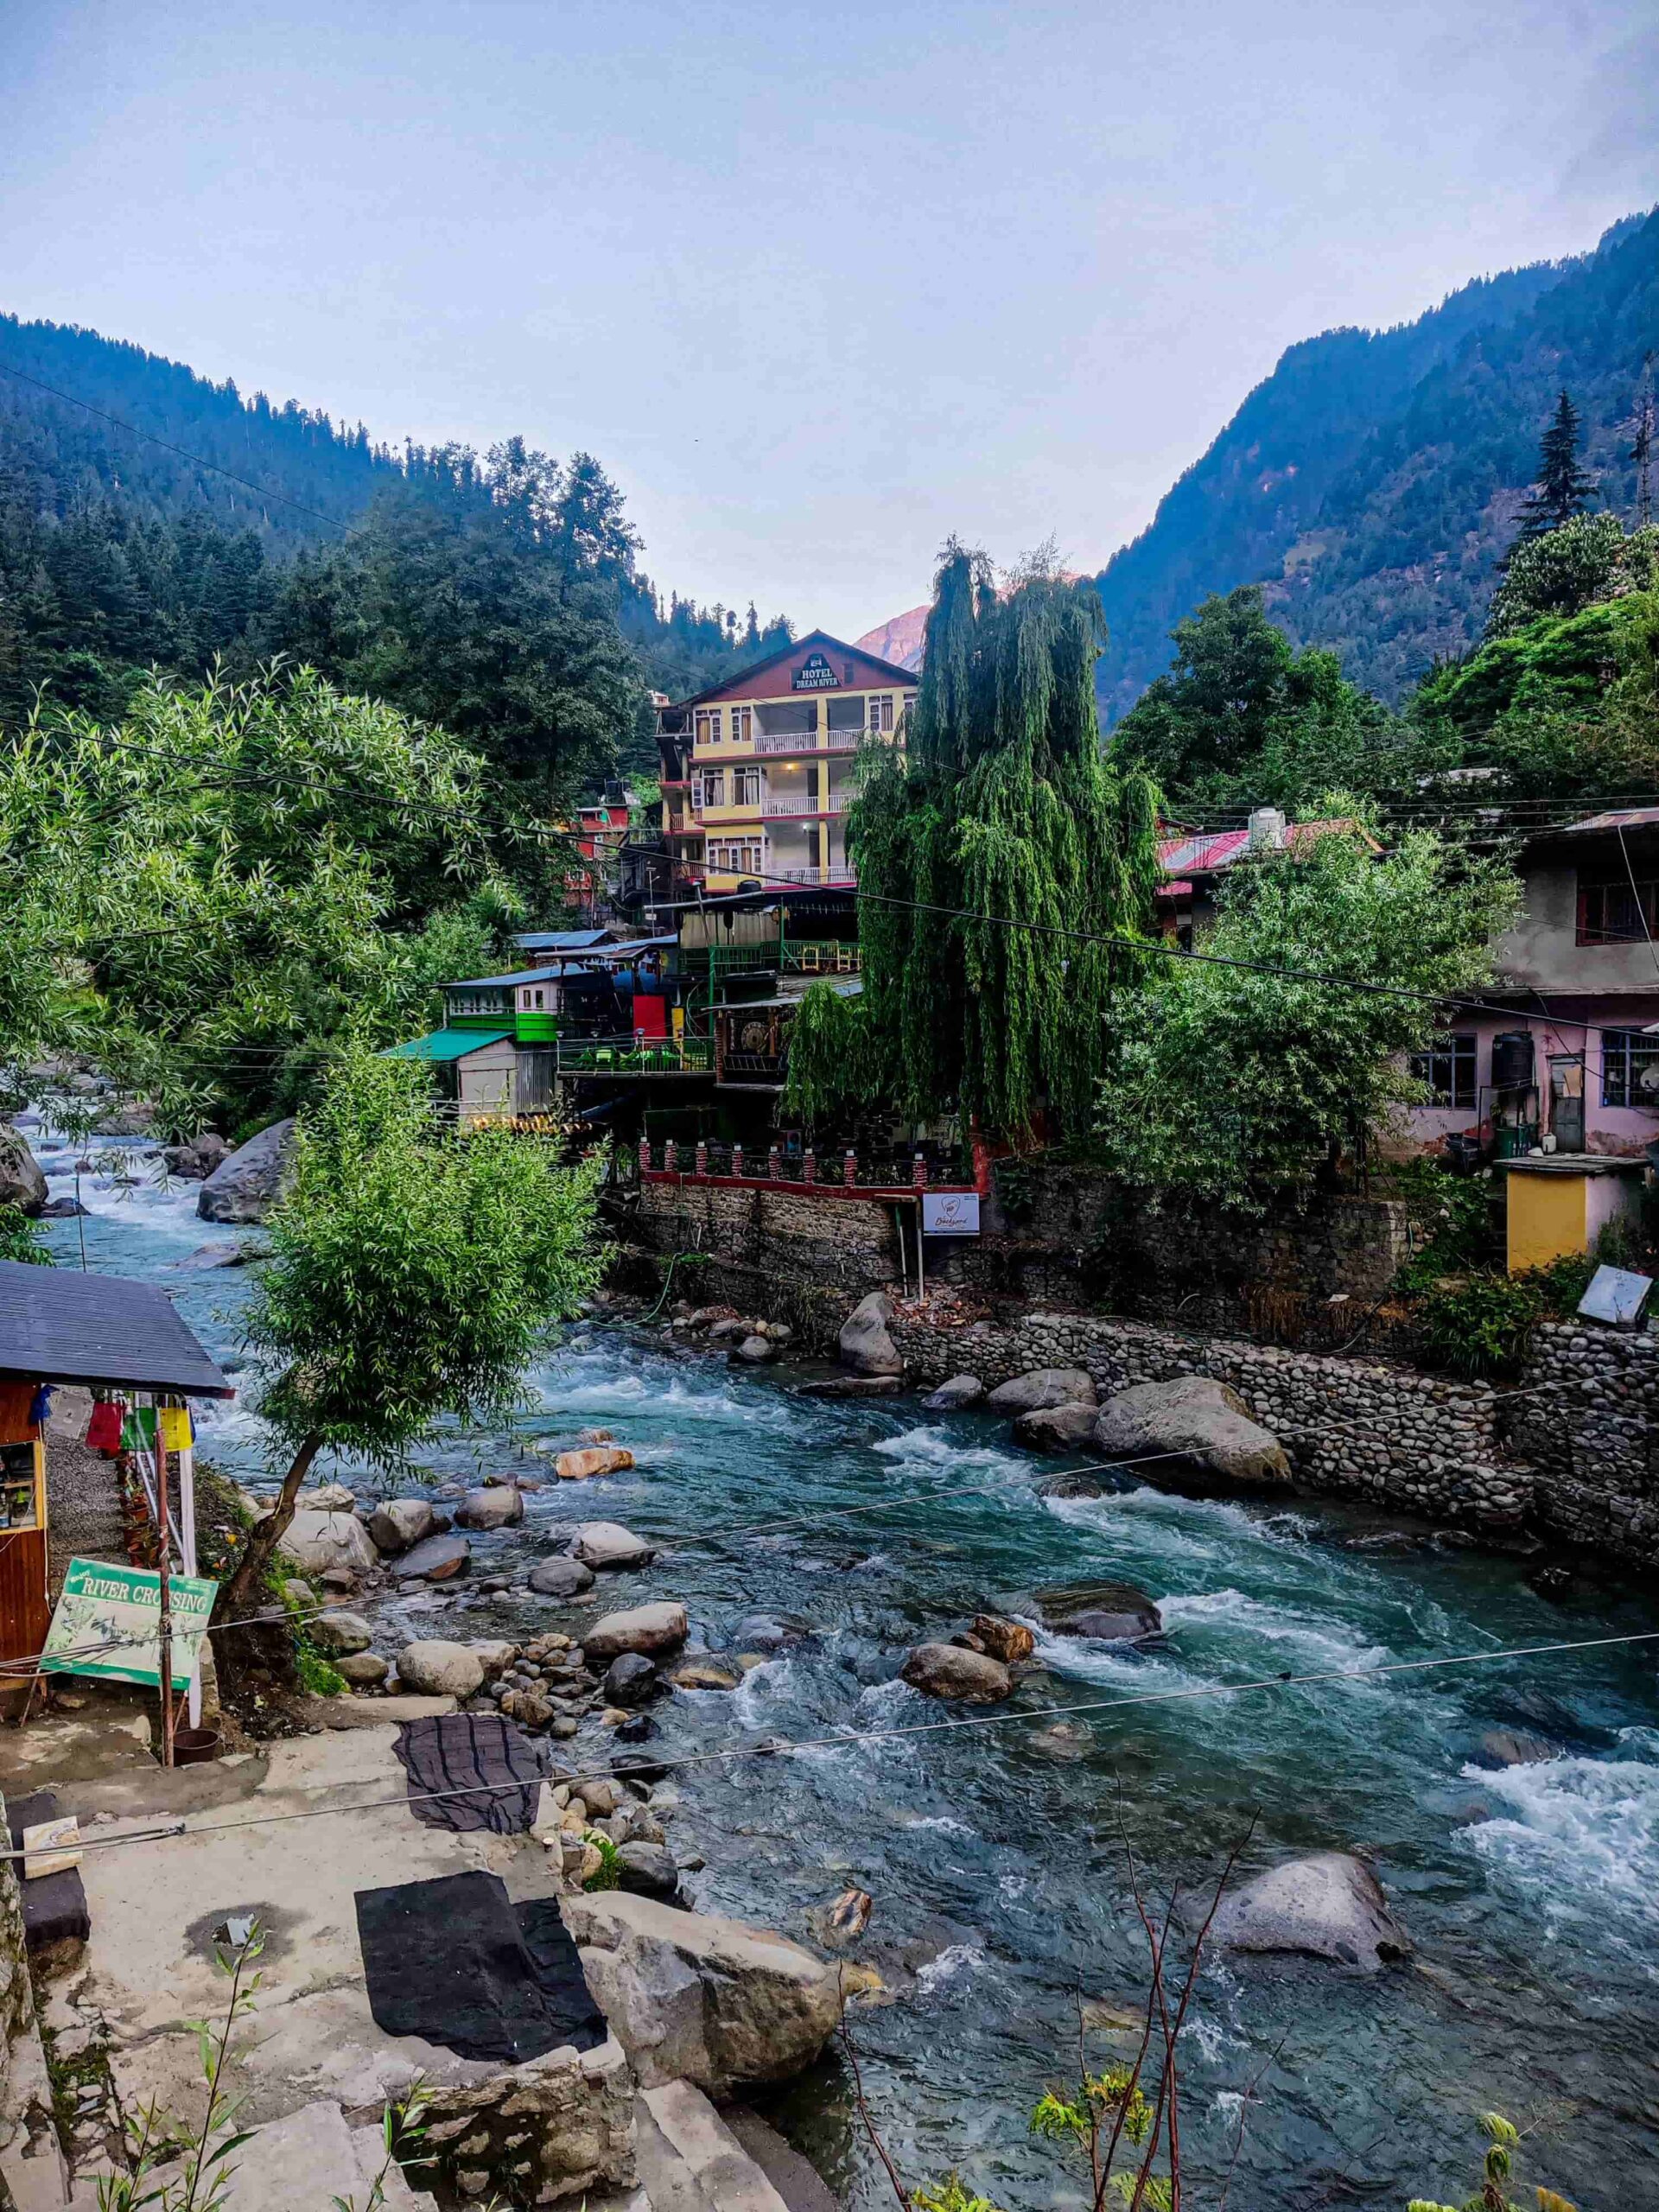 Old Manali is one of the most beautiful places to visit in Manali